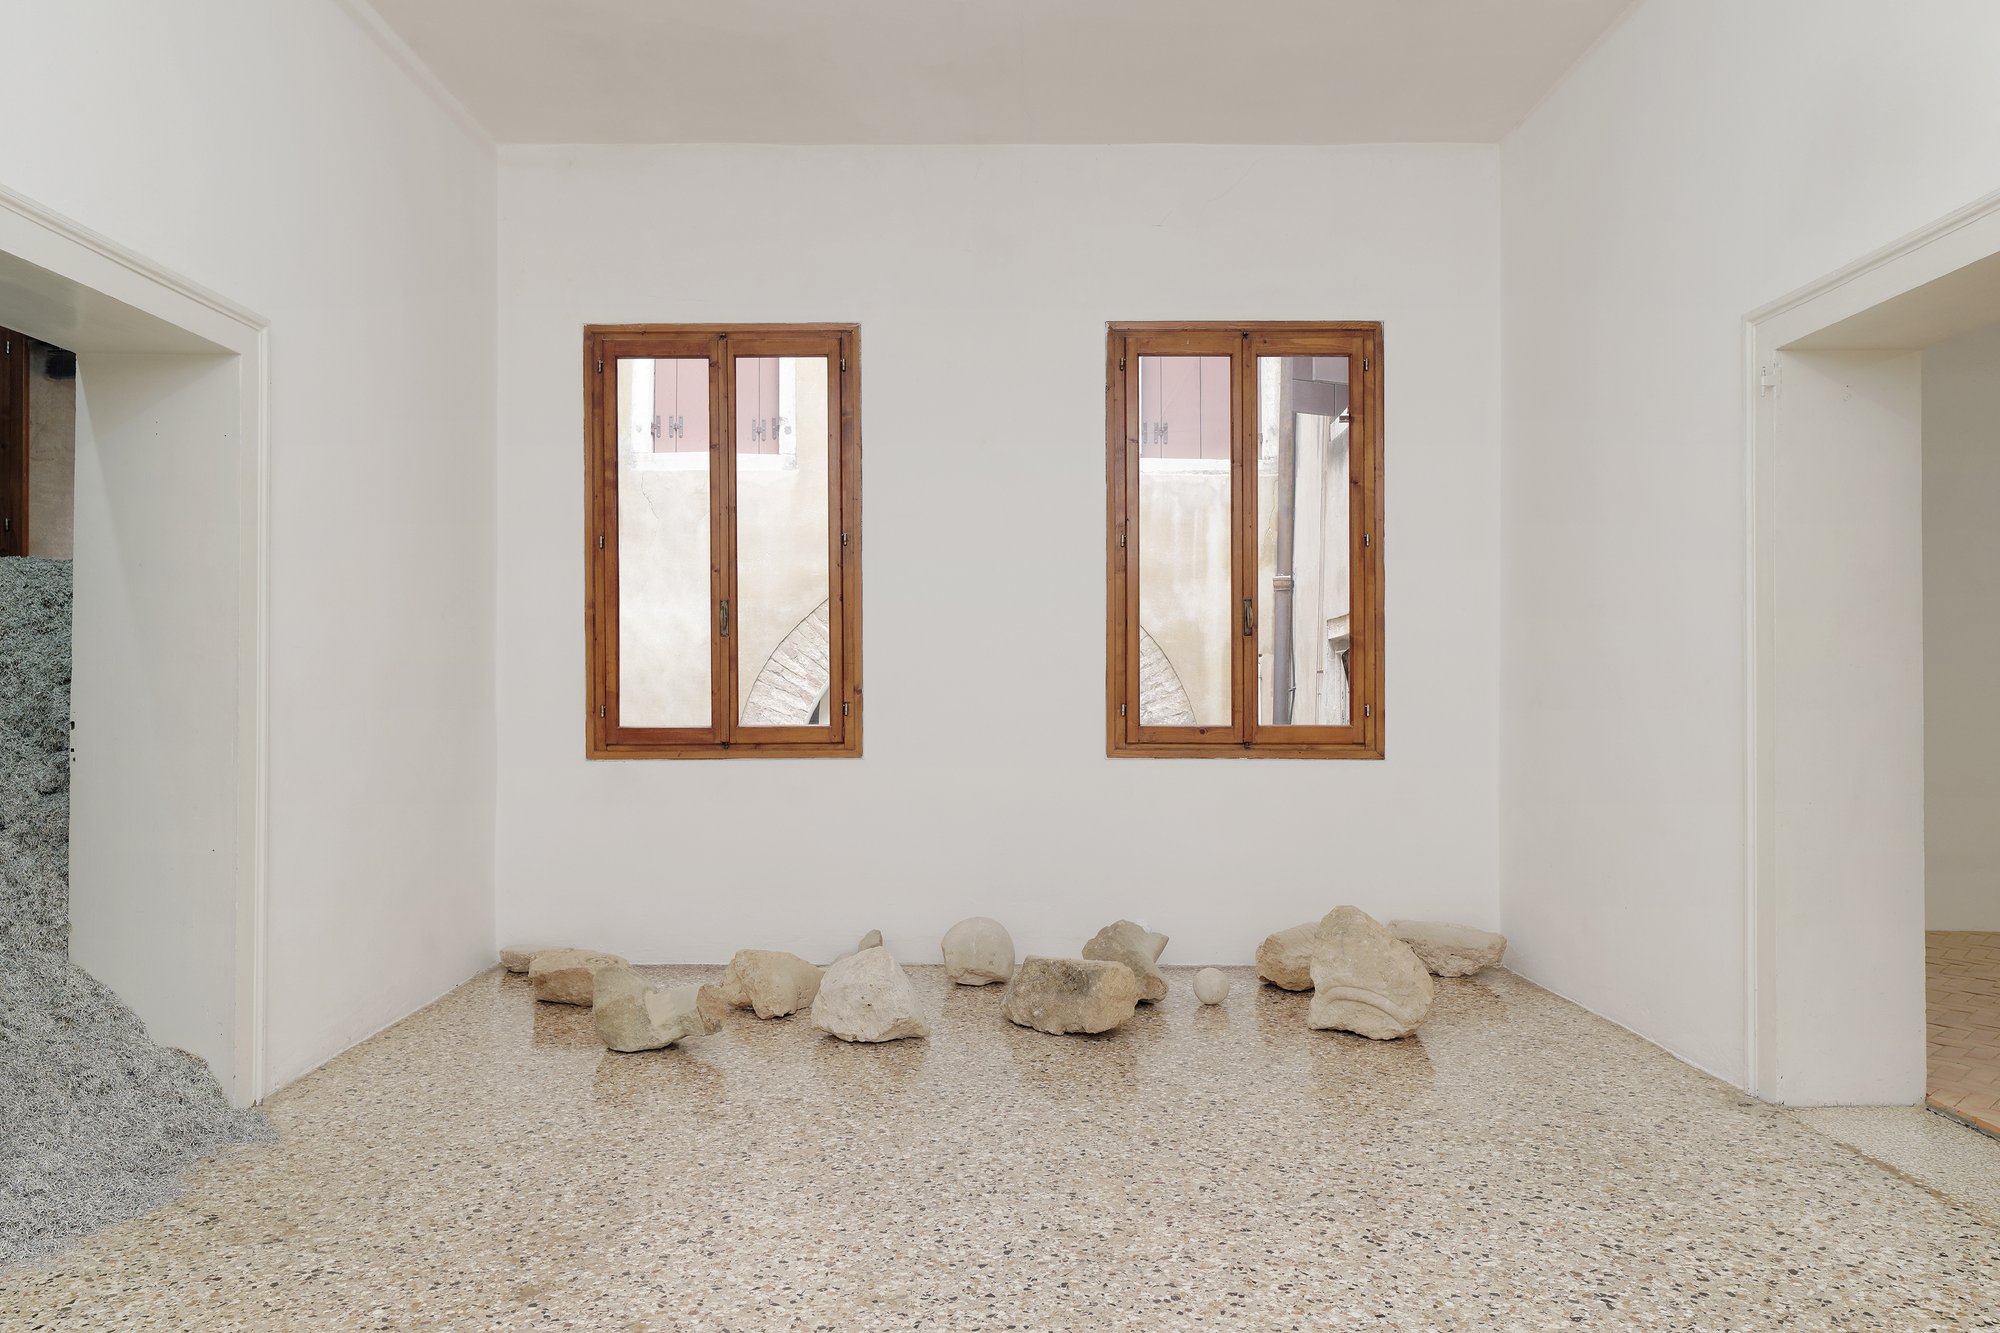 Christodoulos Panayiotou, Installation view, Two Days After Forever, Venice Biennale, 2015